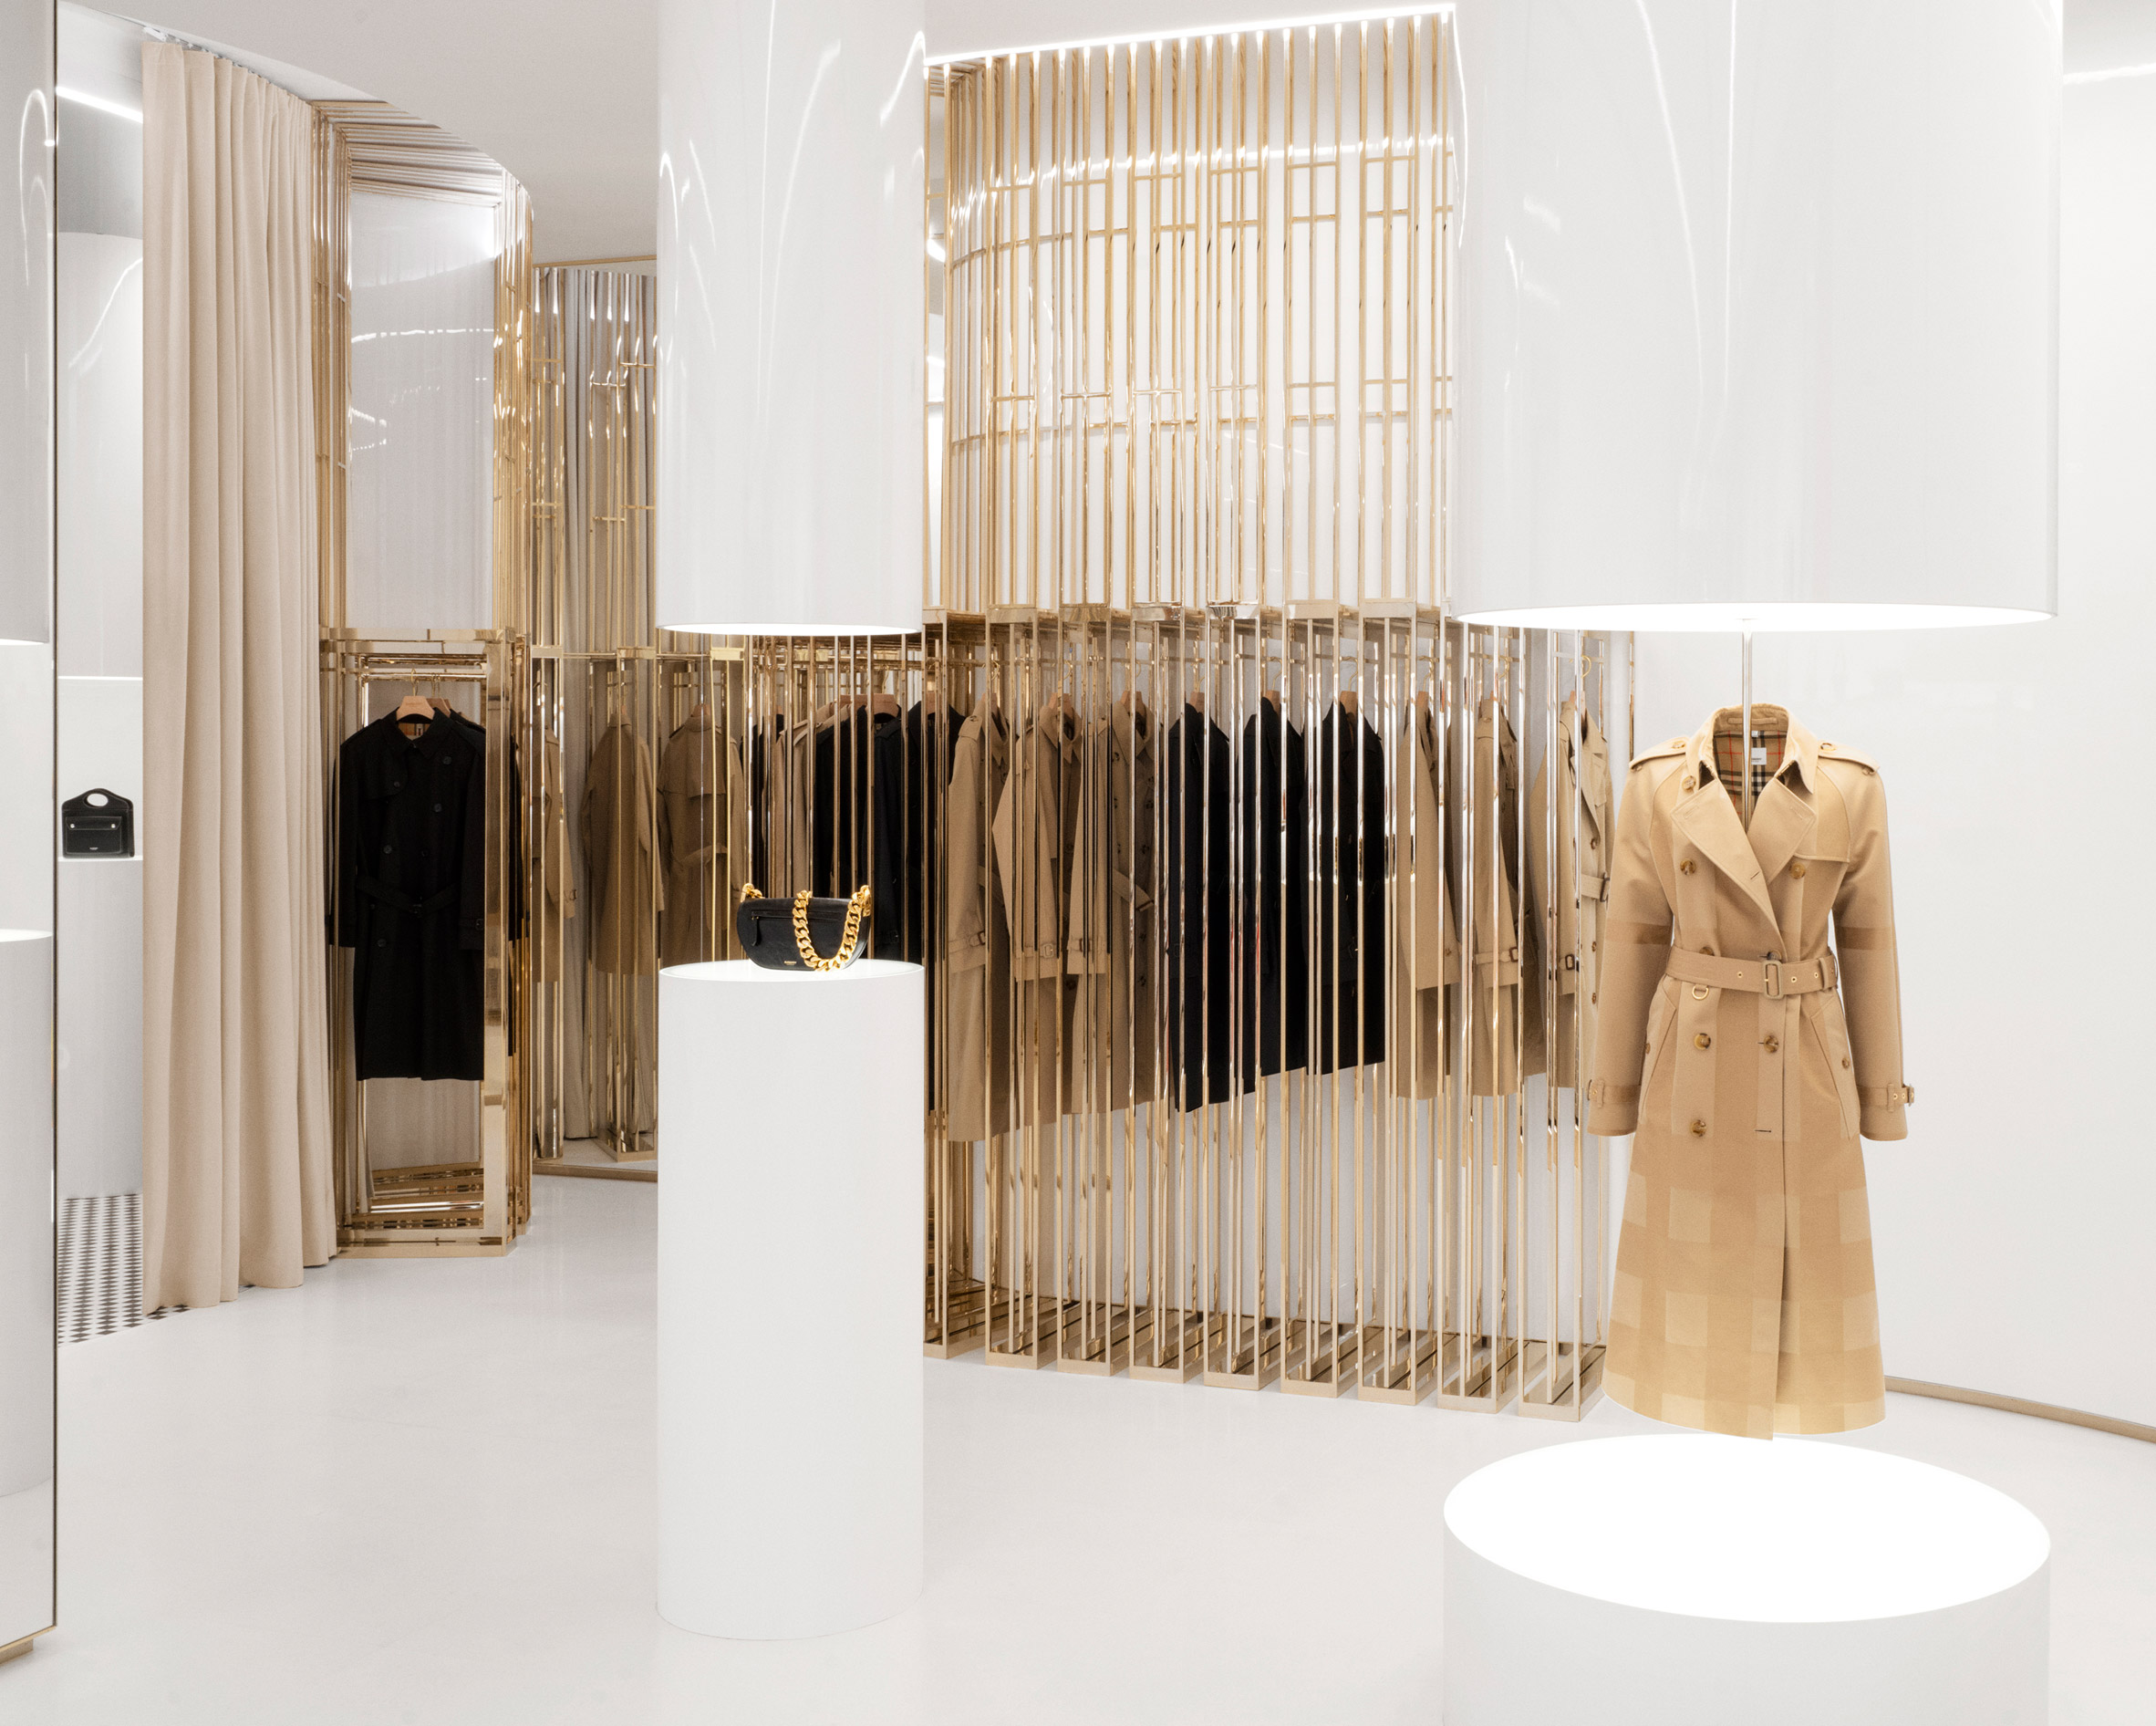 Burberry trench coat displayed in London flagship using champagne-coloured steel rails